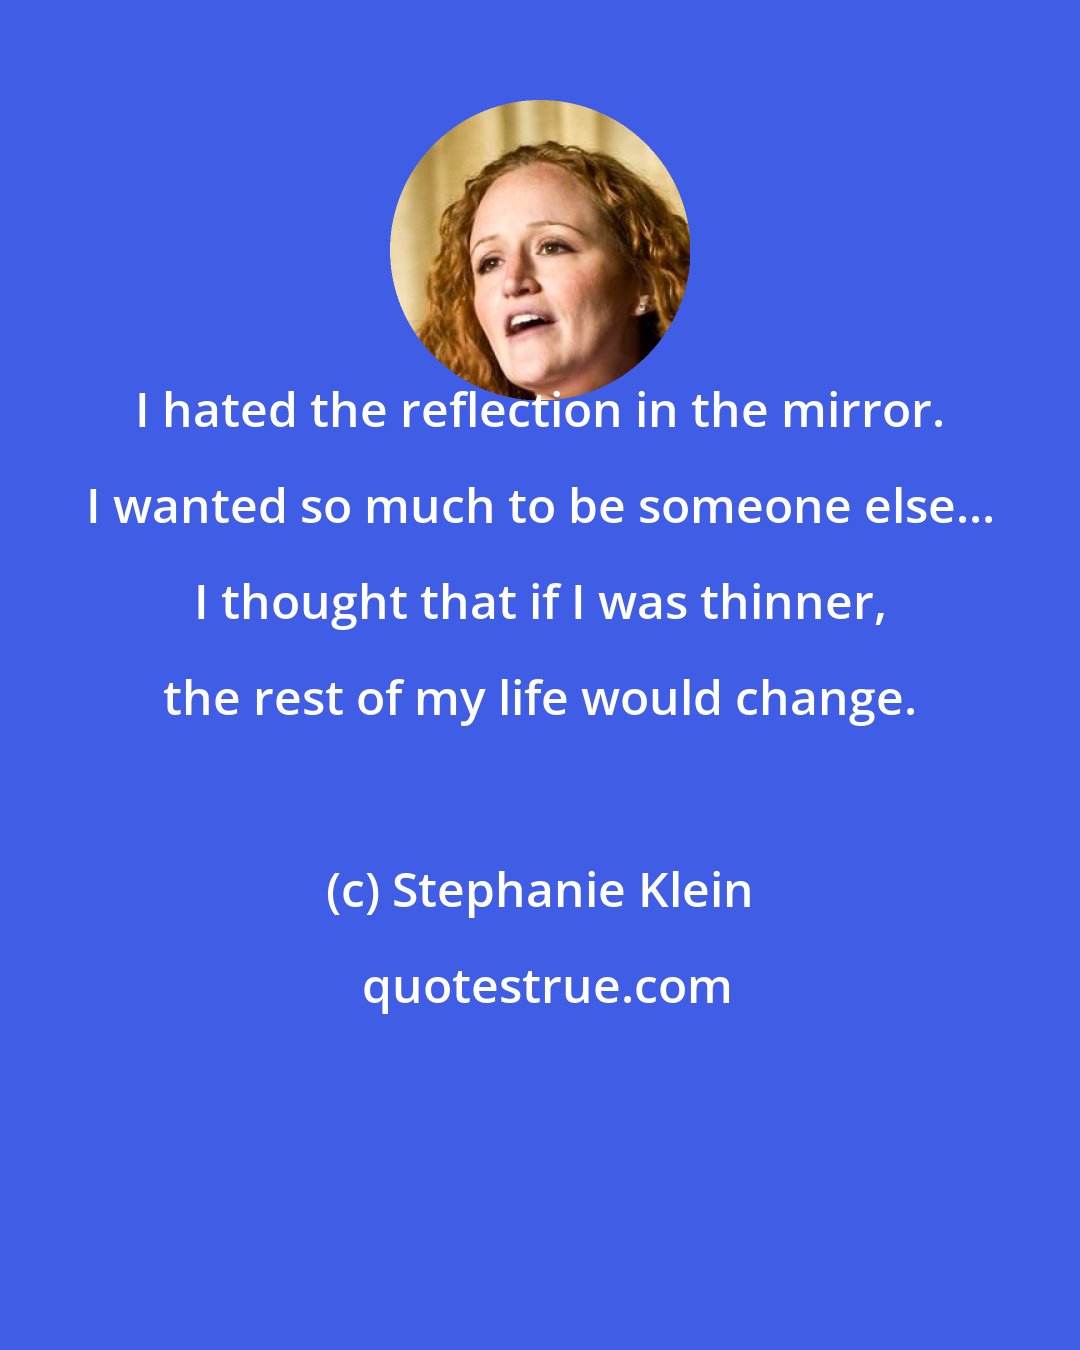 Stephanie Klein: I hated the reflection in the mirror. I wanted so much to be someone else... I thought that if I was thinner, the rest of my life would change.